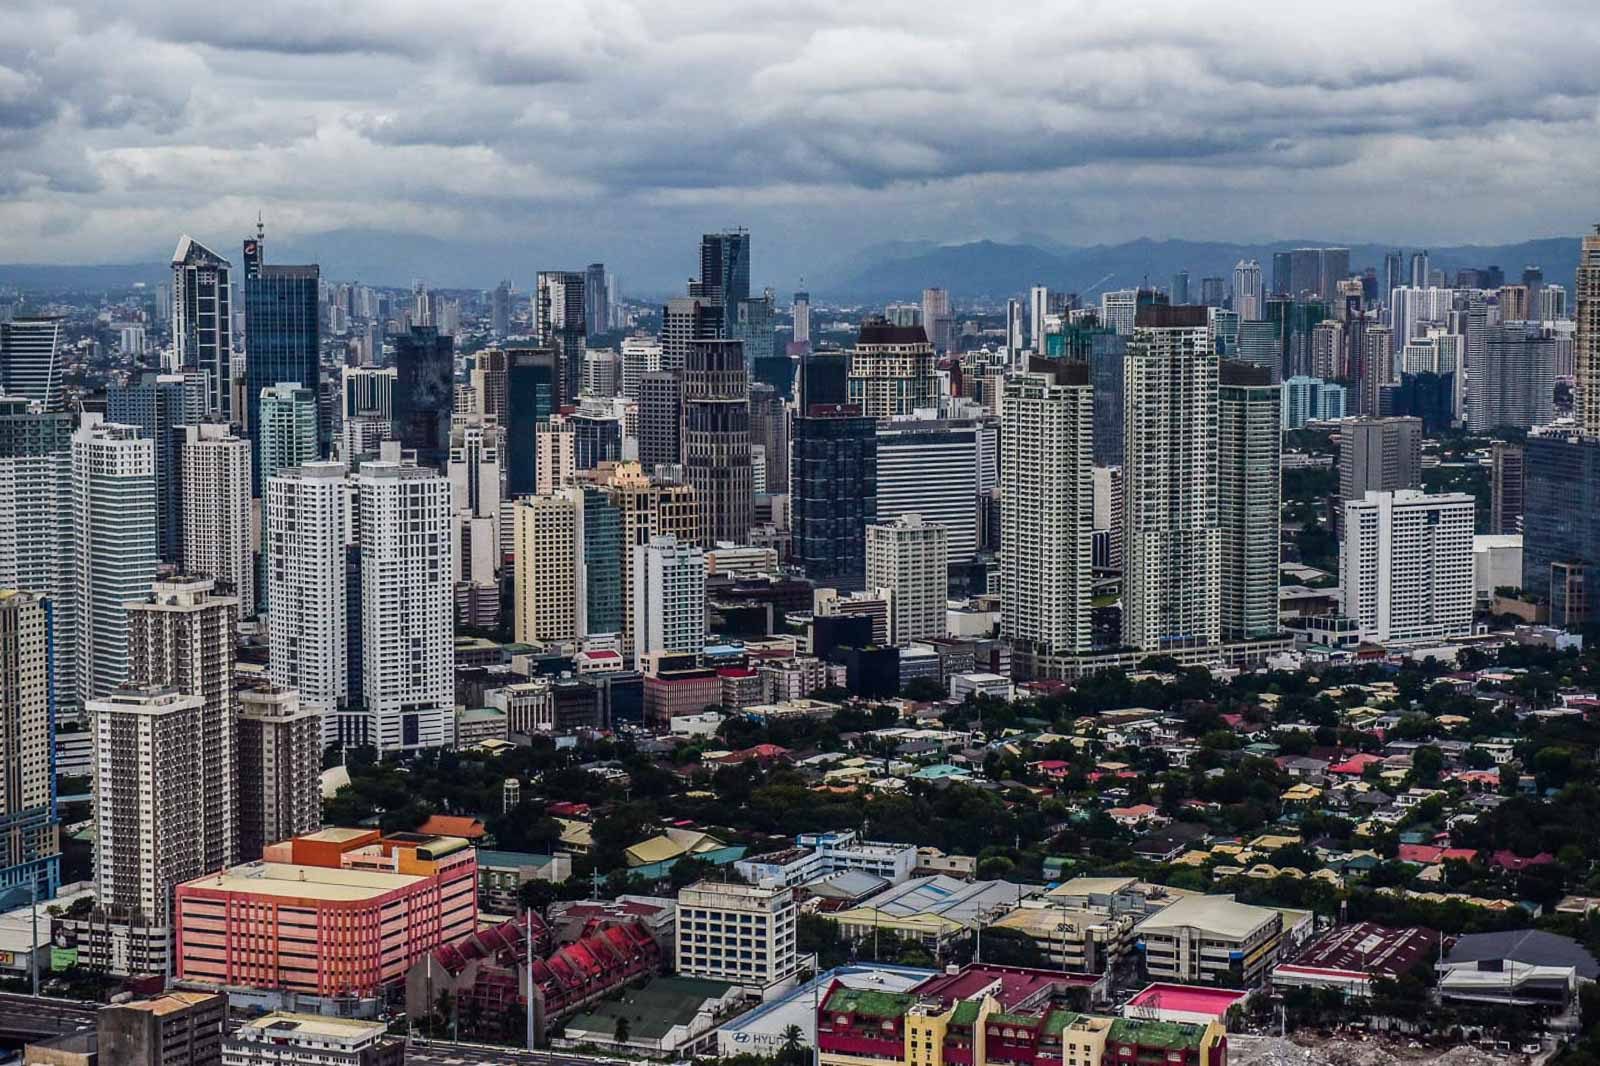 Philippine economy grows by 5.7% in Q1 2024, below expectations